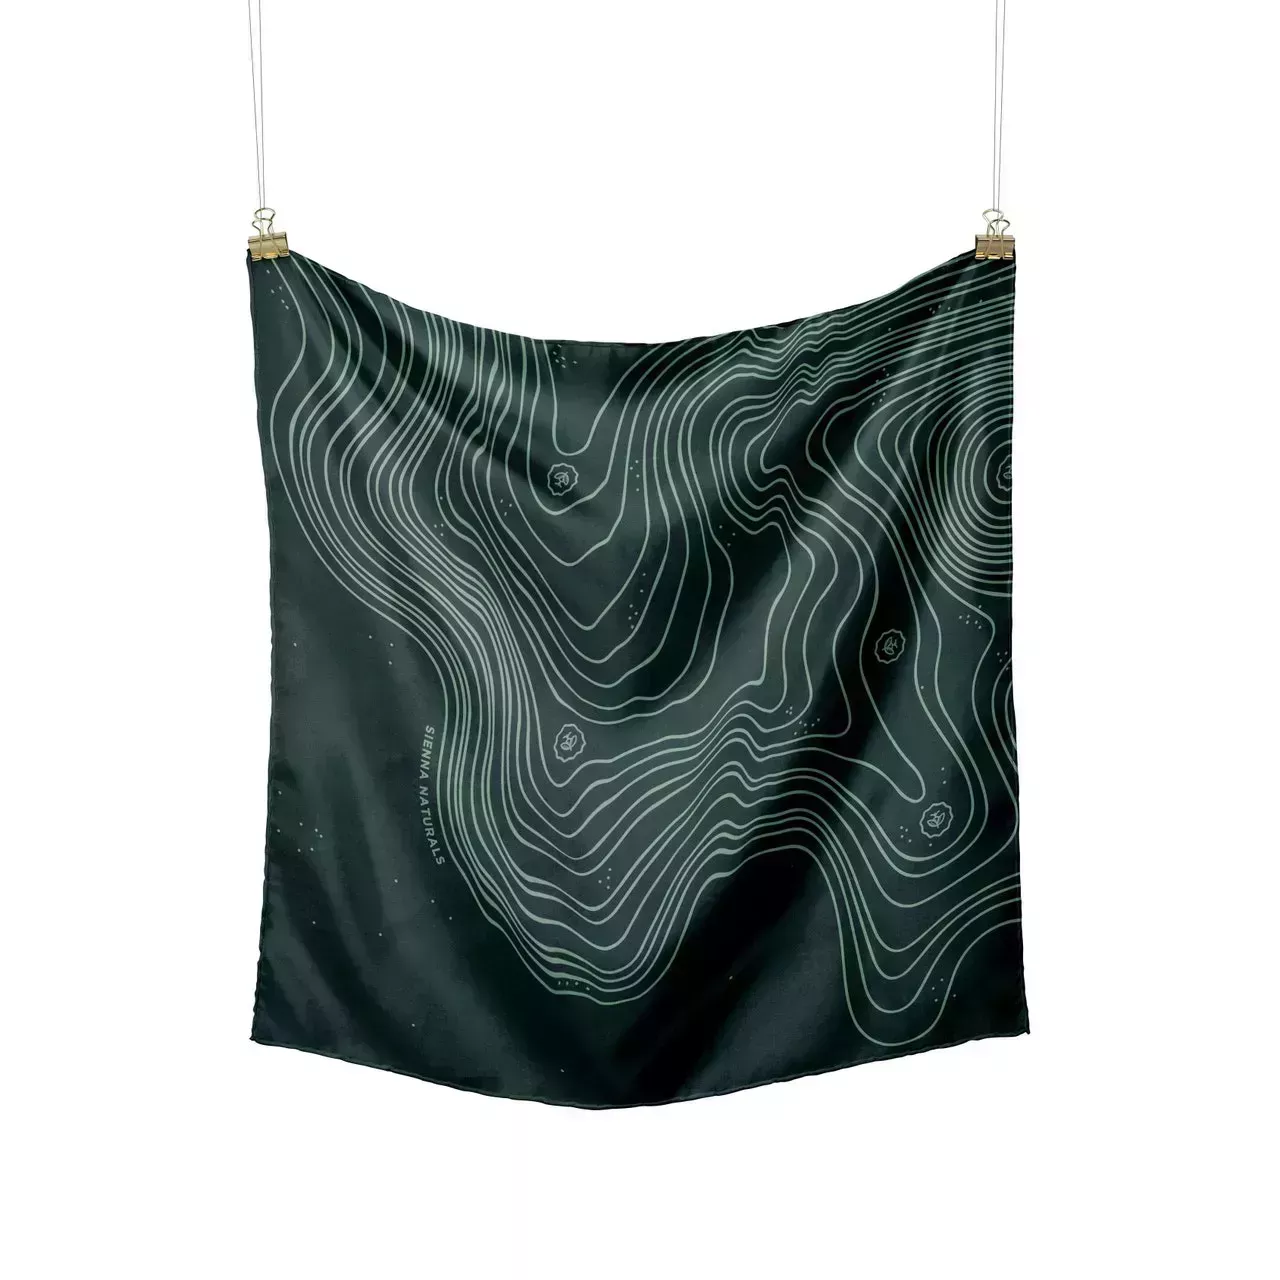 Sienna Naturals Silk Scarf dark green square scarf with light green squiggle topography design hanging from clothespins on white background